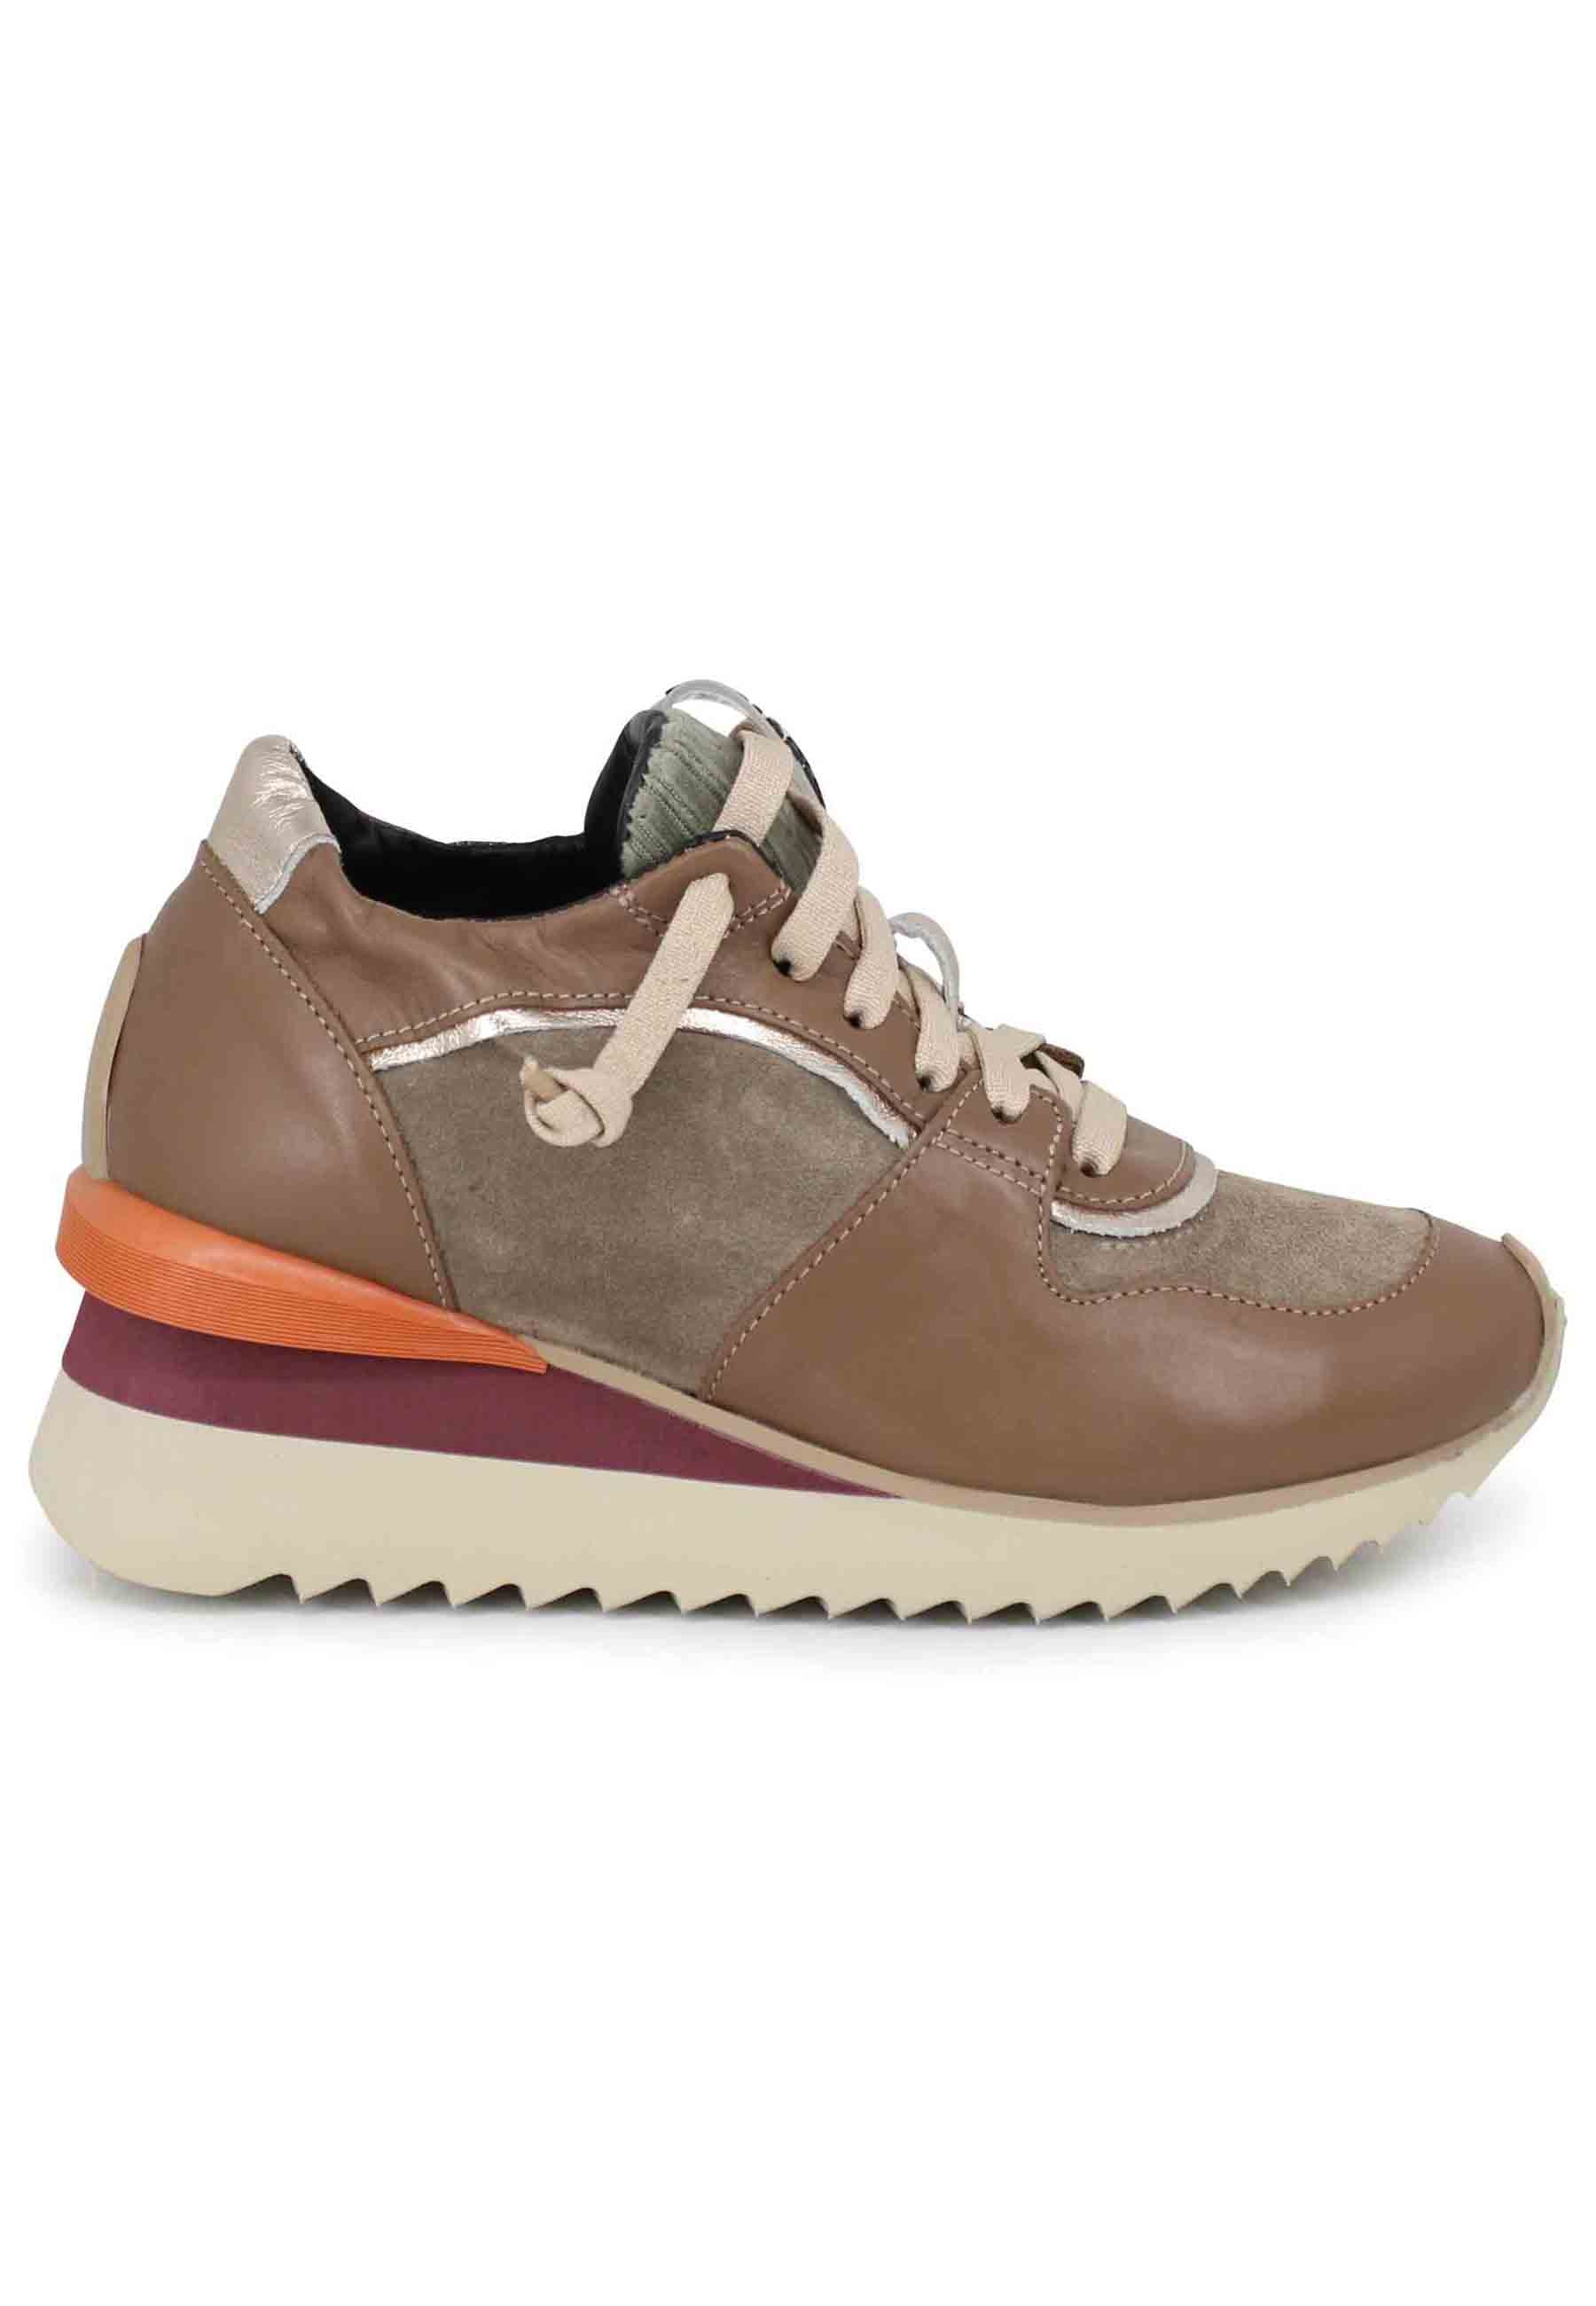 Women's taupe leather sneakers with wedge bottom